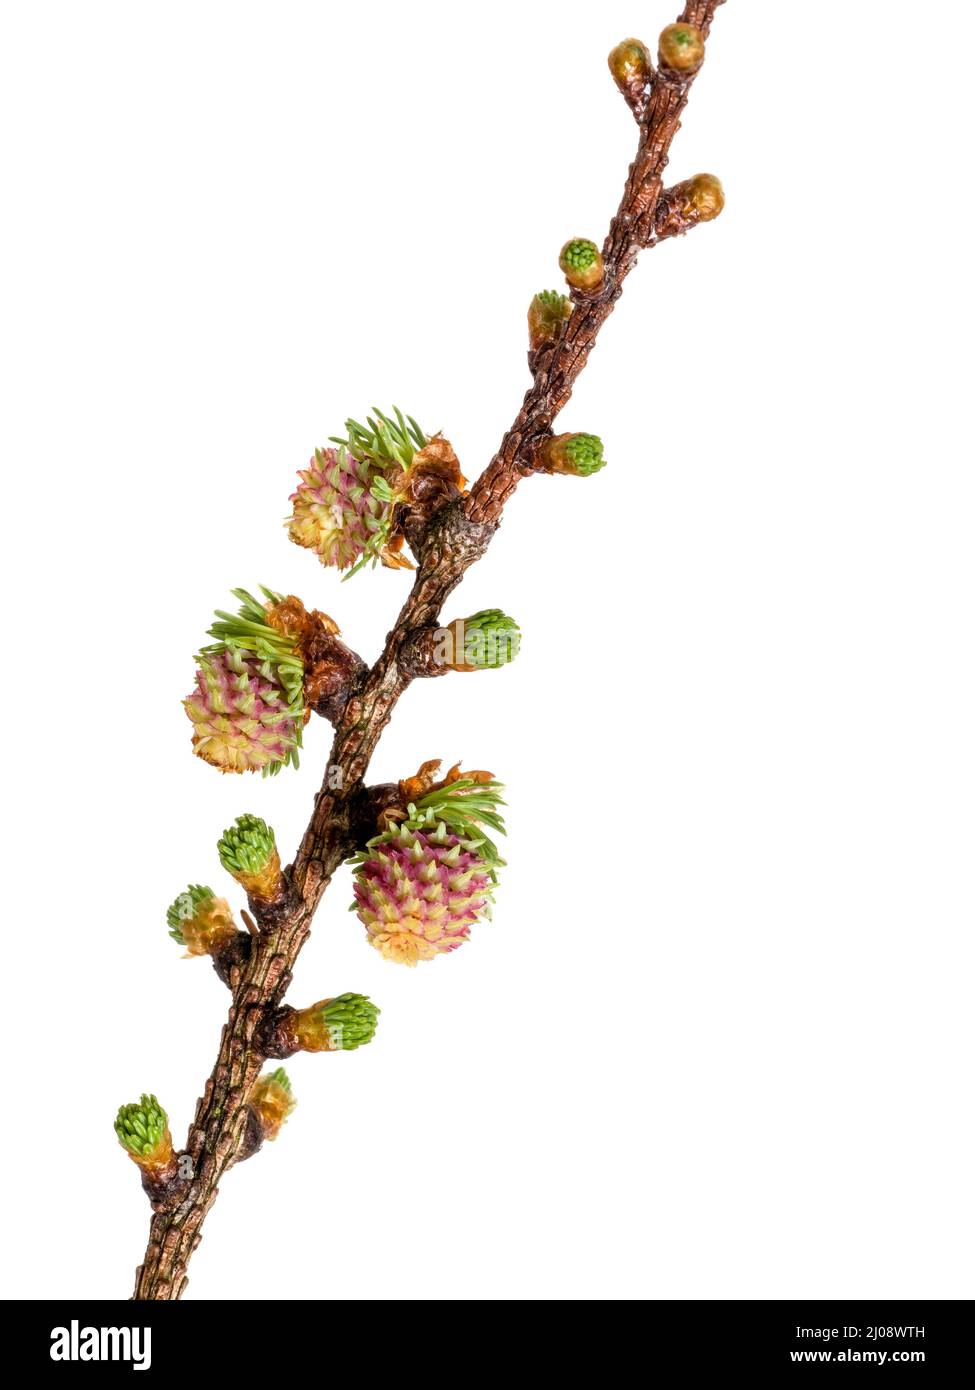 Tiny, baby pine cones - female flowers of the larch tree. Stock Photo